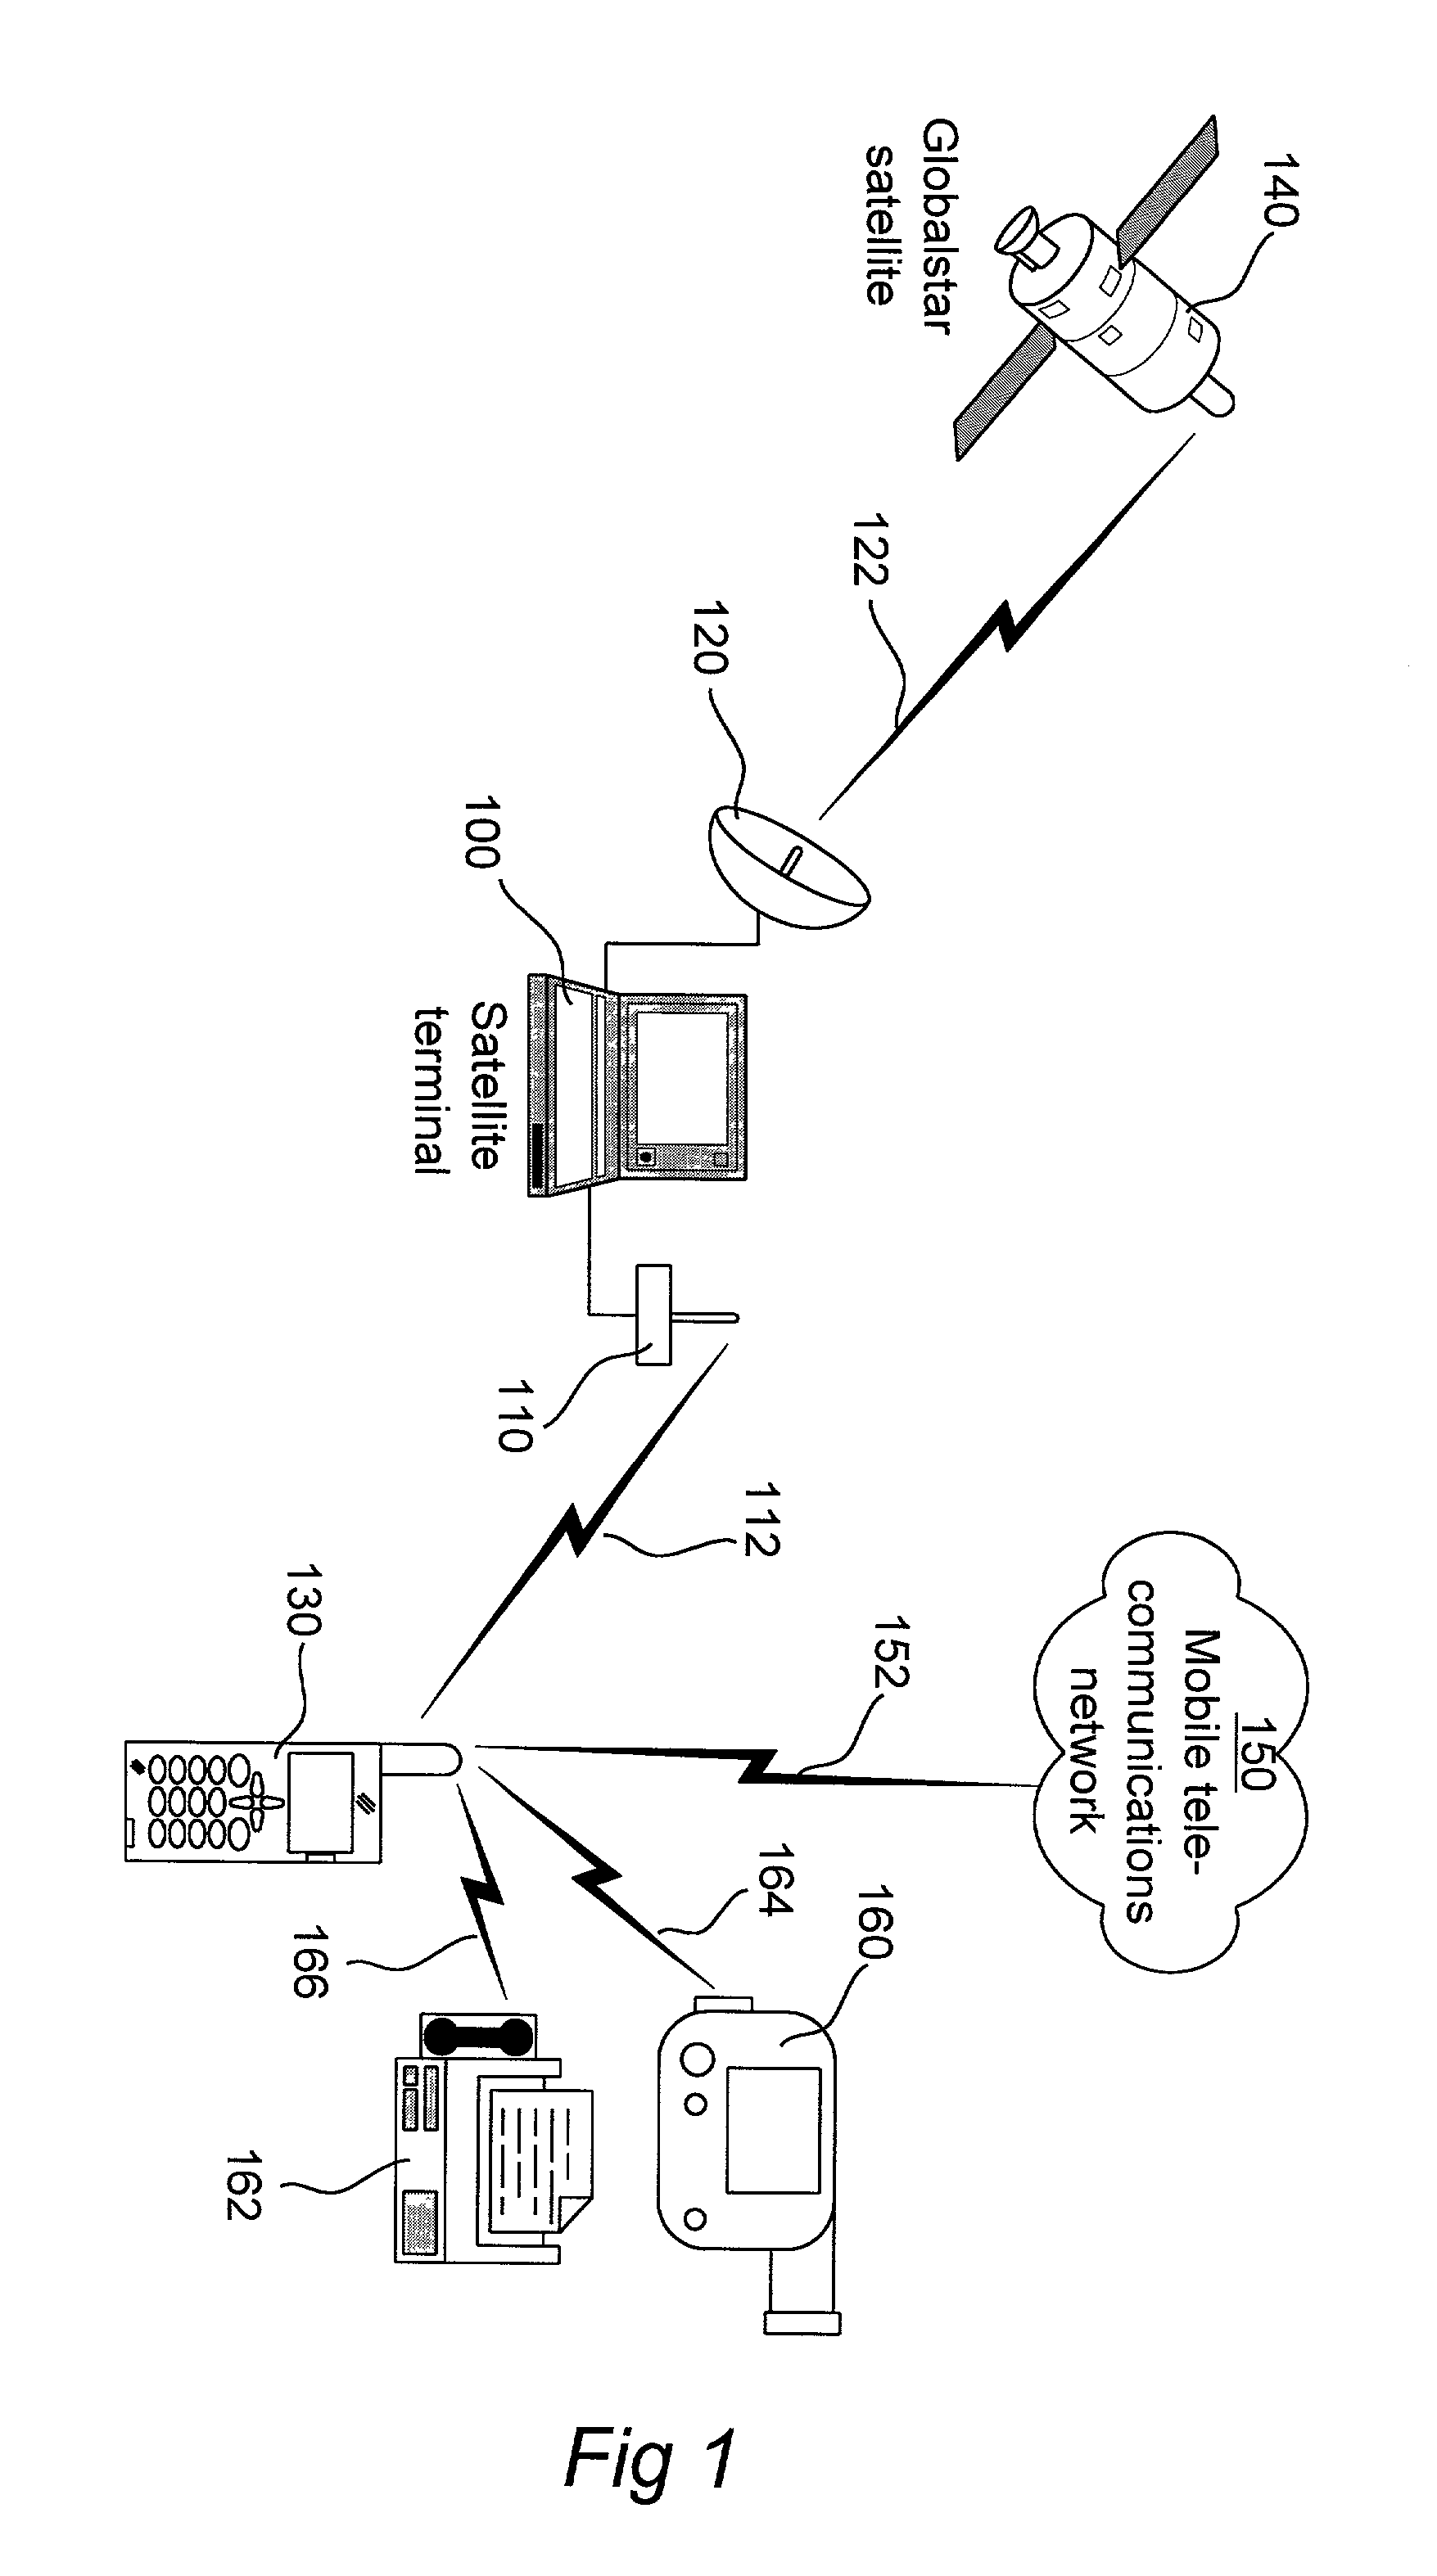 Dual-radio communication apparatus, and an operating method thereof